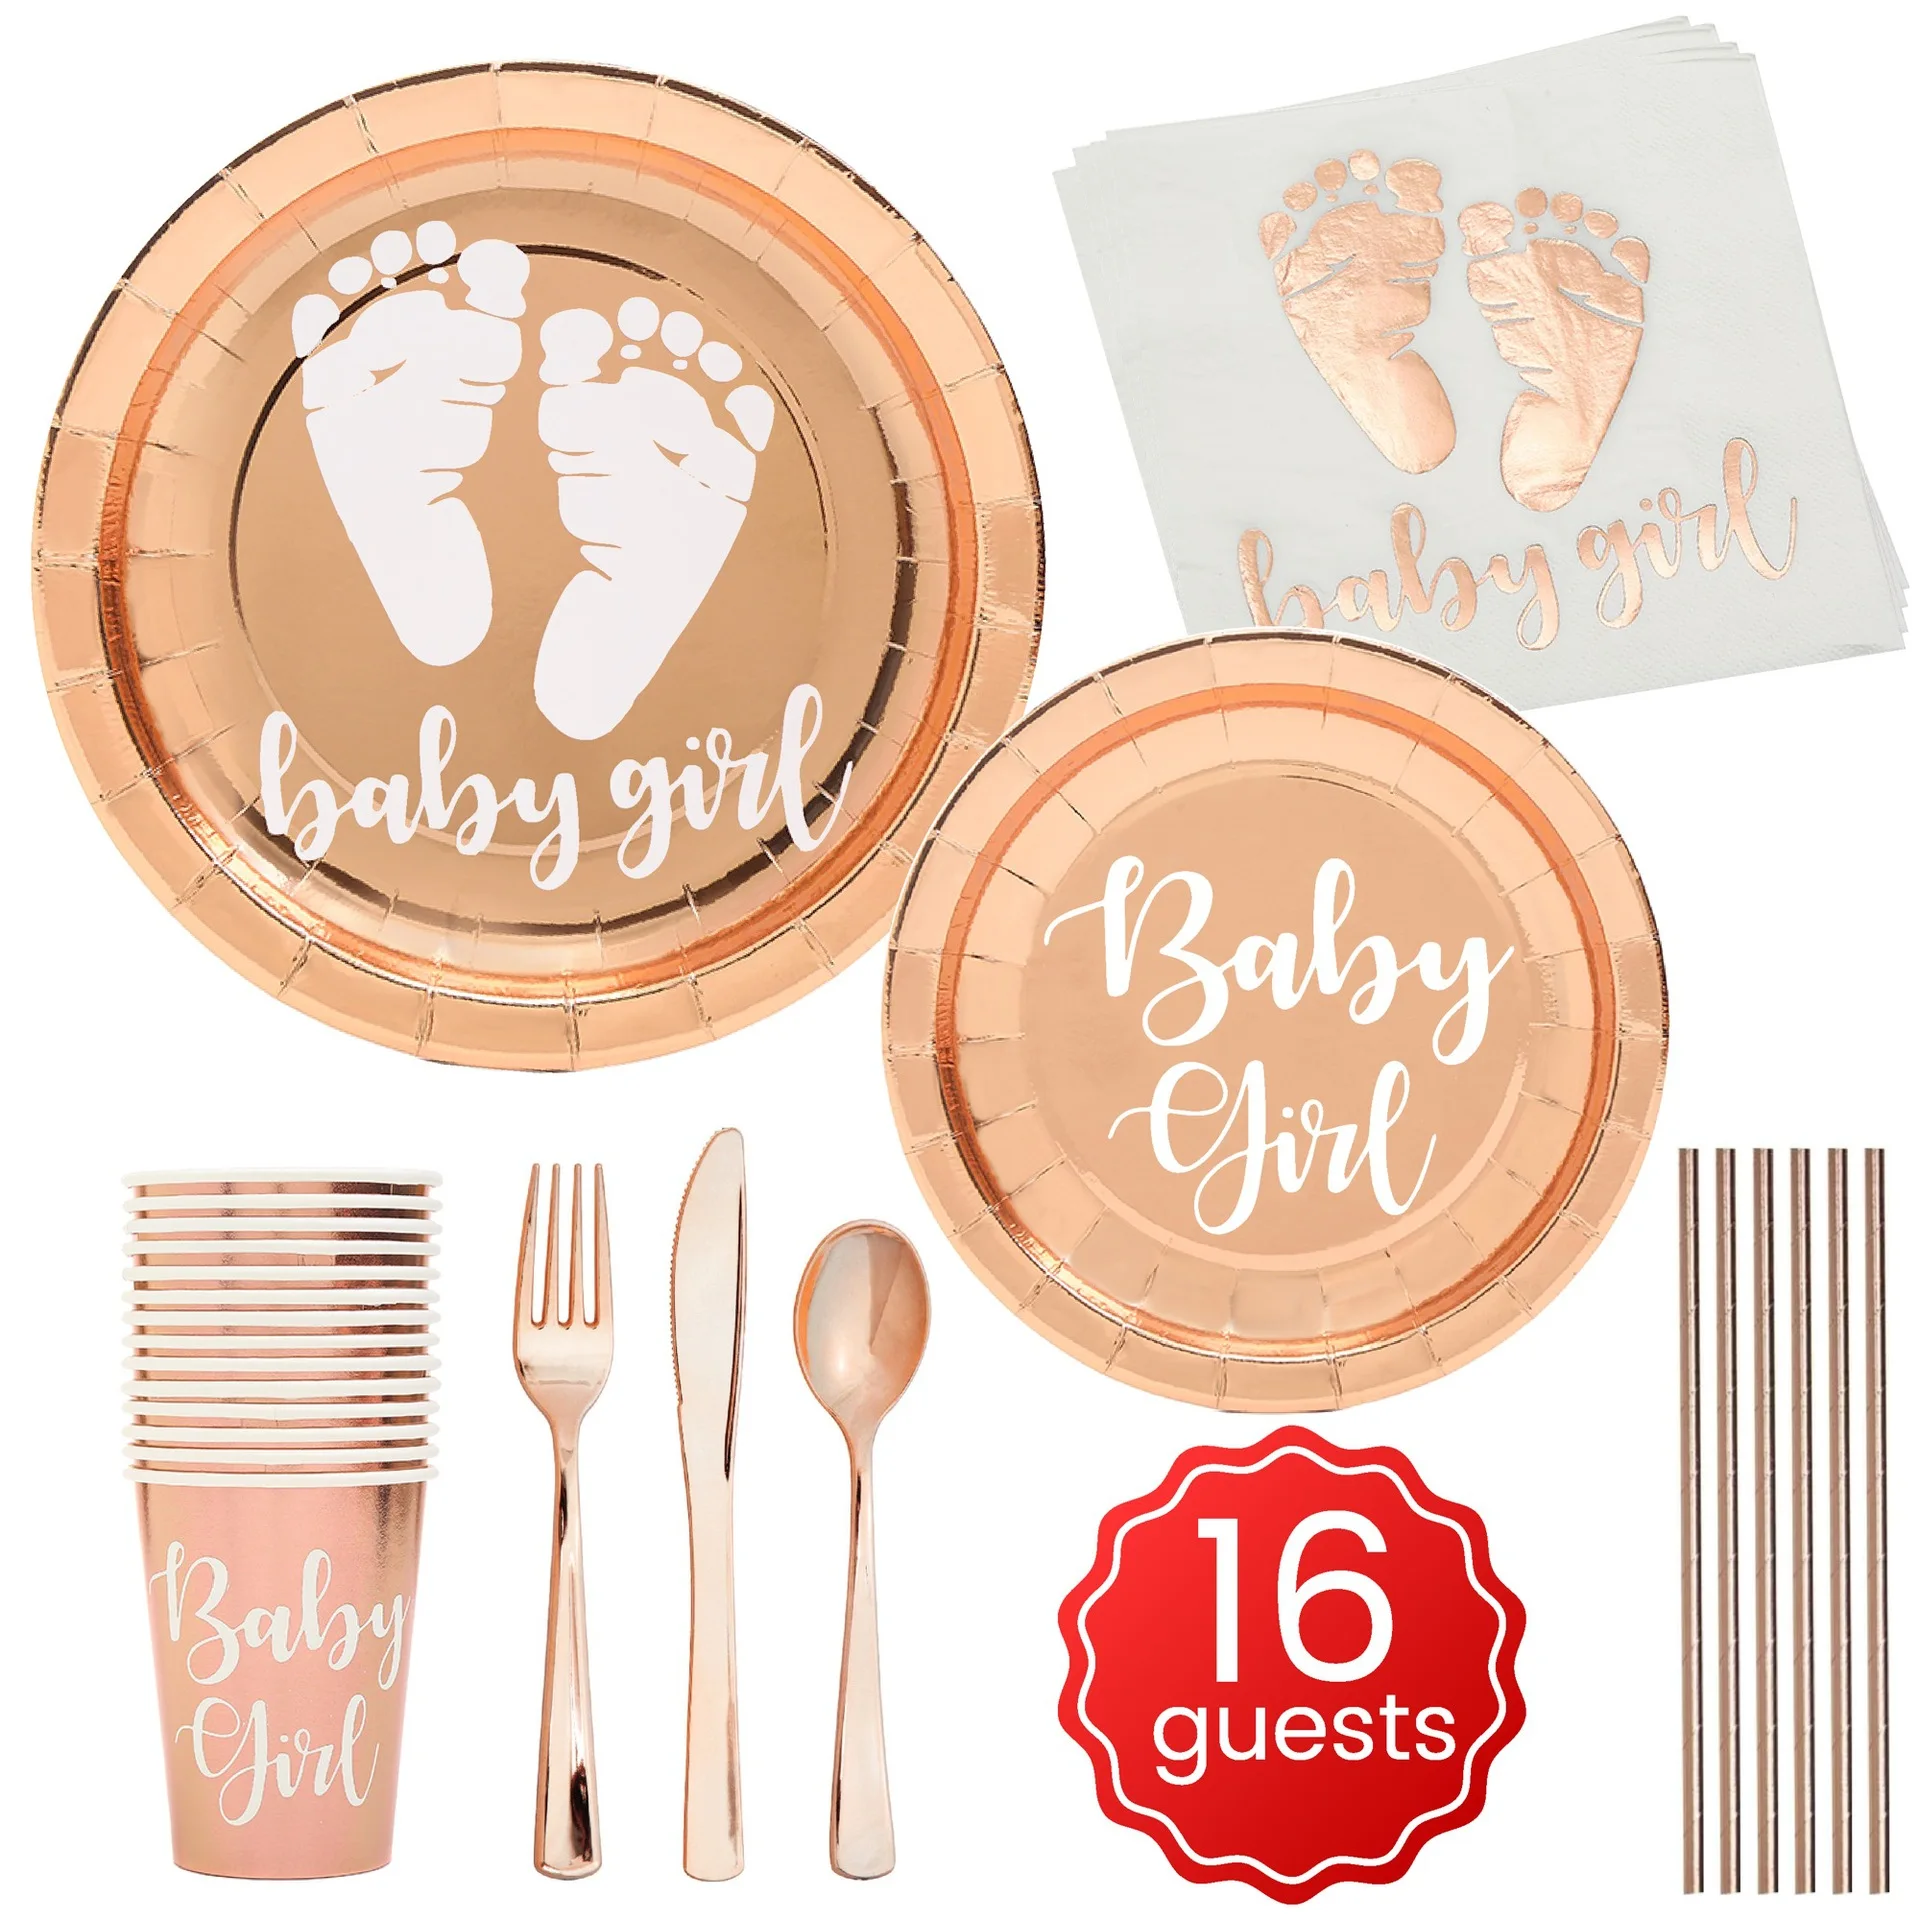 Details about   8 Rose Gold Star Paper Plates Oh Baby Shower Party Tableware Gender Reveal Party 